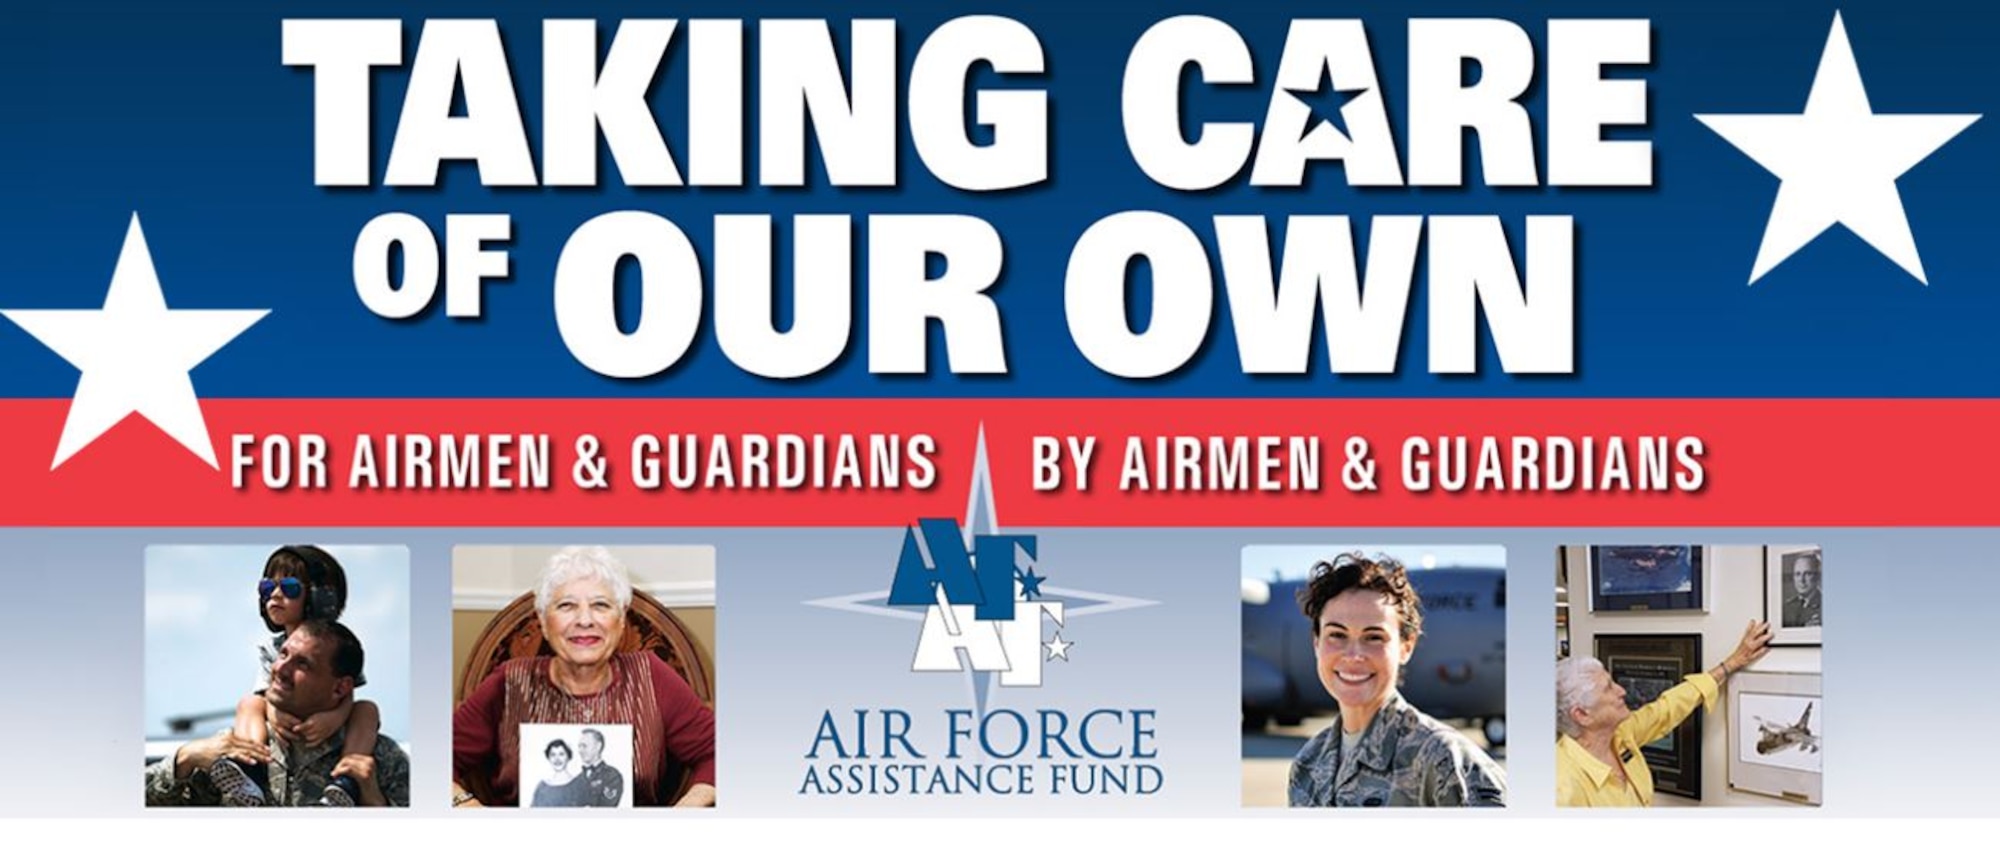 This year's Air Force Assistance Fund "Taking Care of Our Own" campaign runs March 7 to May 13 at Homestead Air Reserve Base. It allows critical support to Airmen, Guardians, and their families – active duty, Reservists, Guardsmen, retirees, and surviving spouses from the Air and Space Forces.